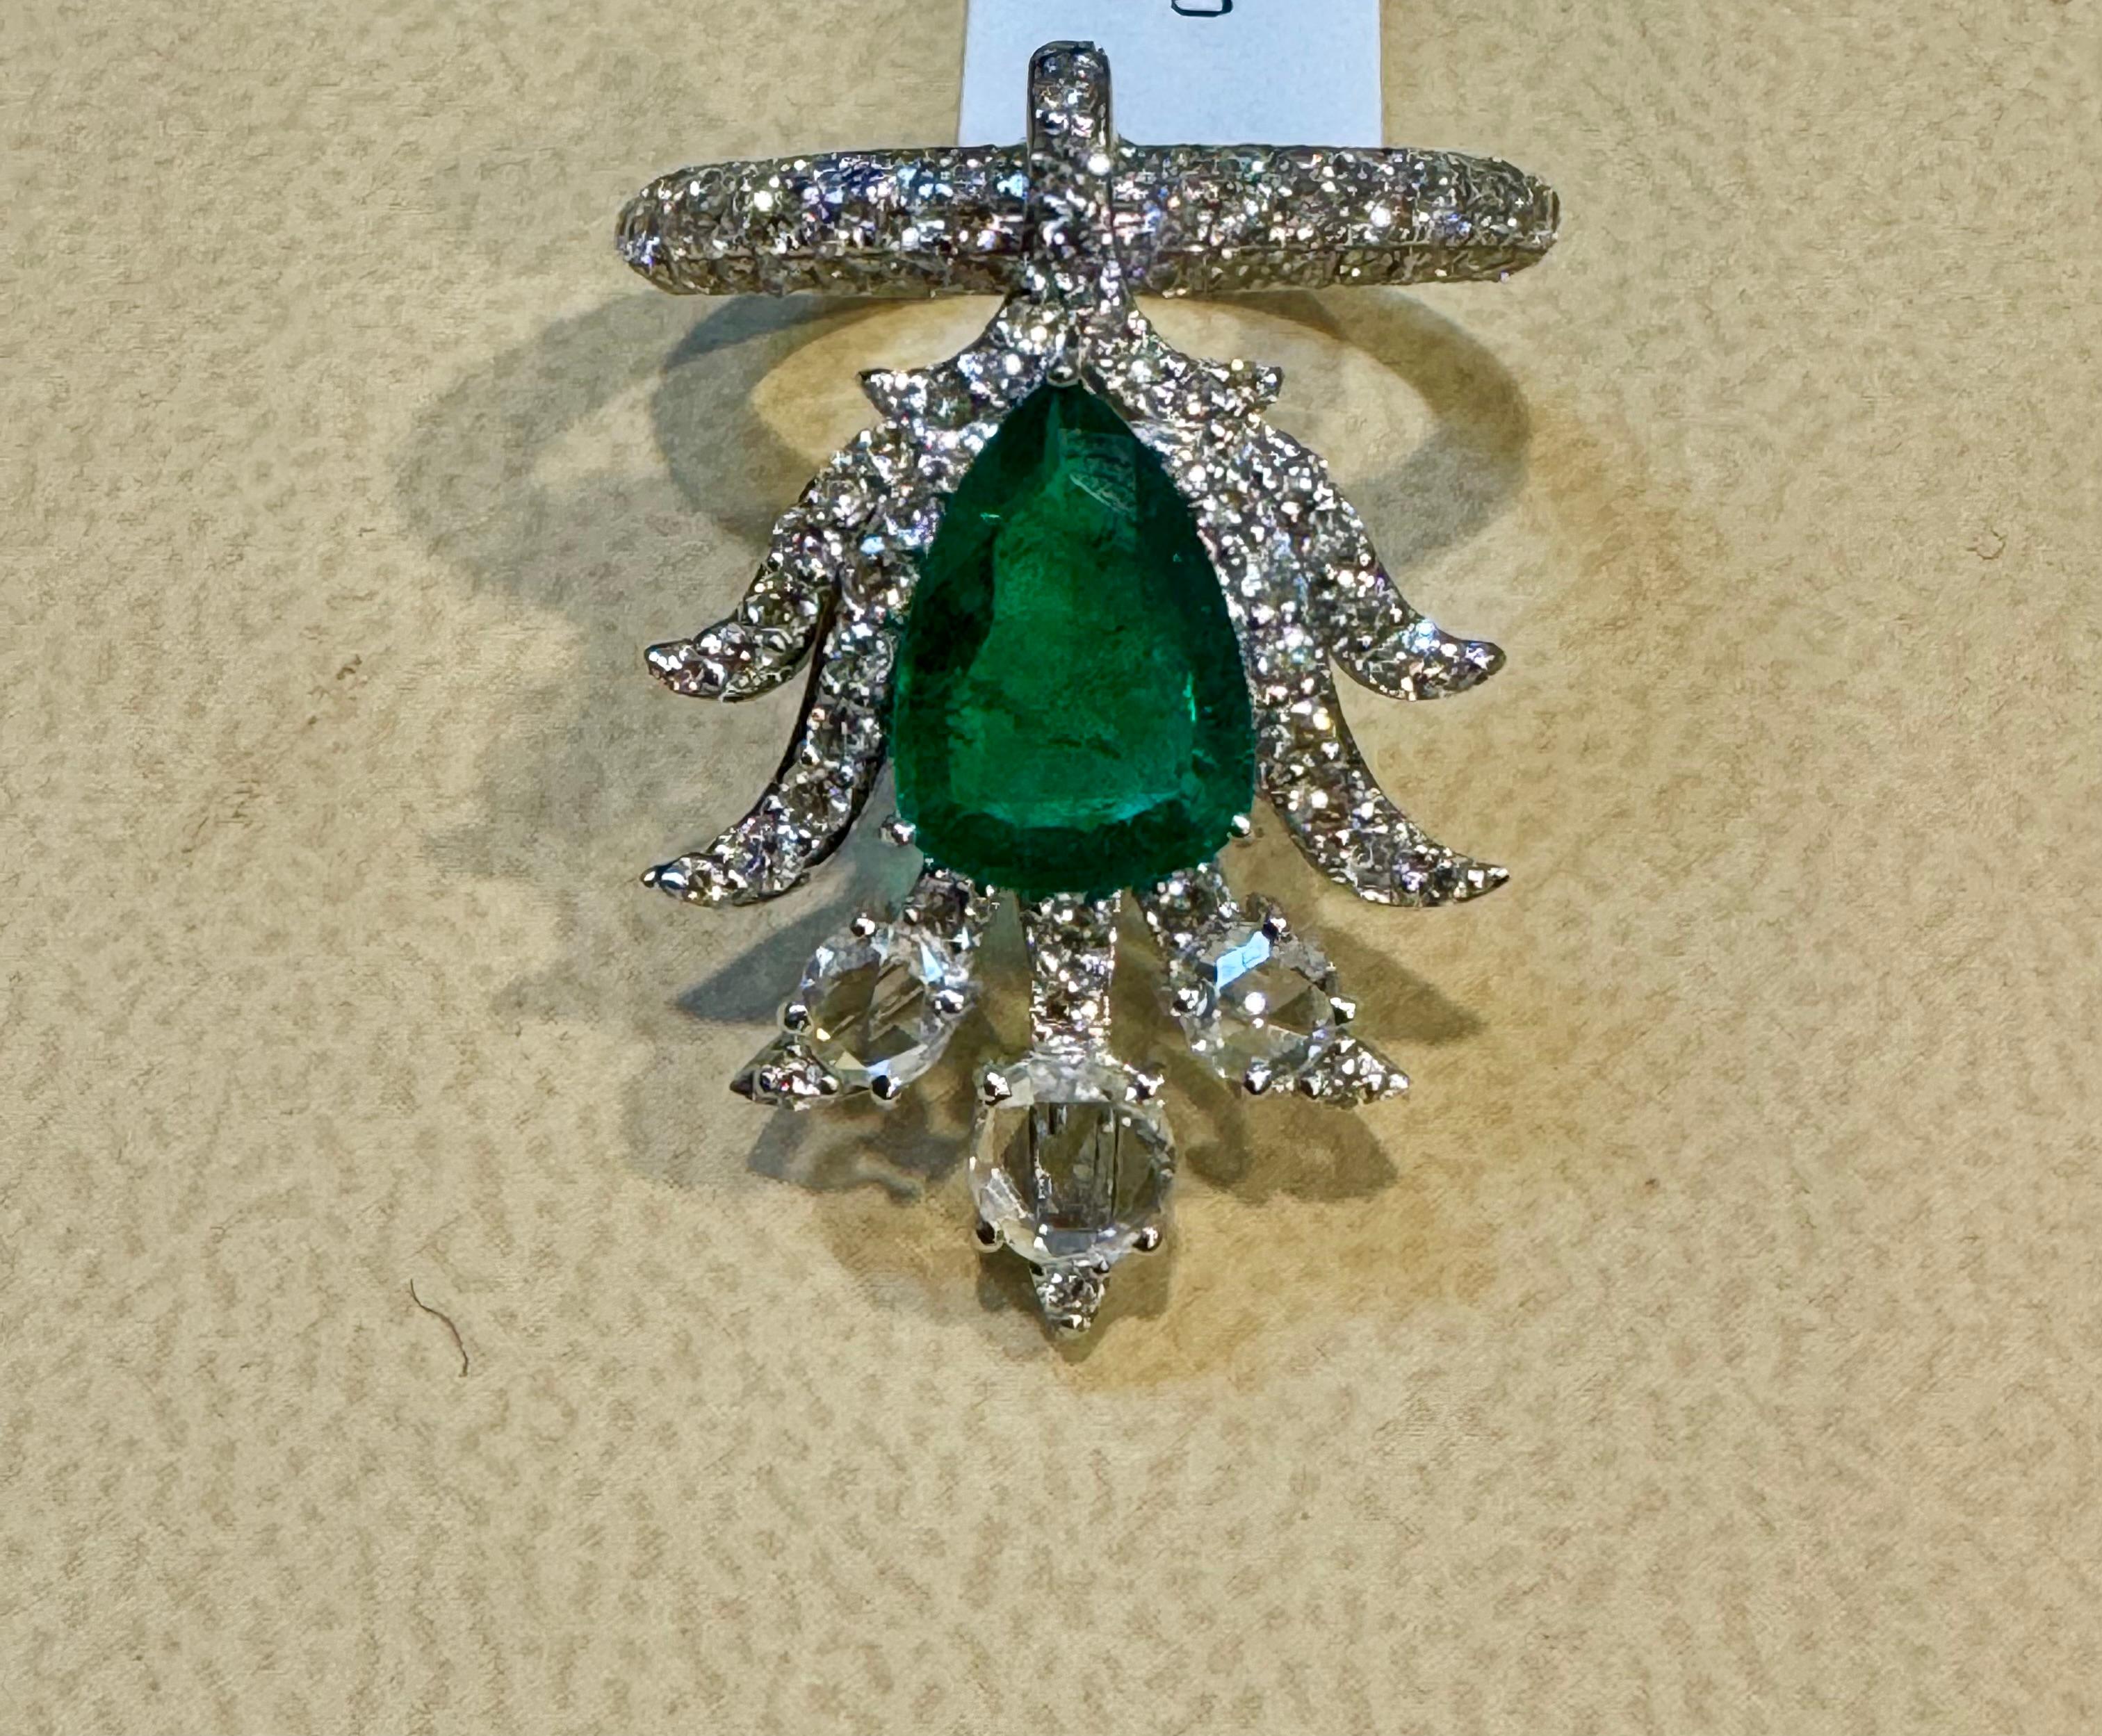 2 Ct Finest Zambian Pear Emerald & 2 Ct Diamond Ring in 18 Kt Gold Size 7 In Excellent Condition For Sale In New York, NY